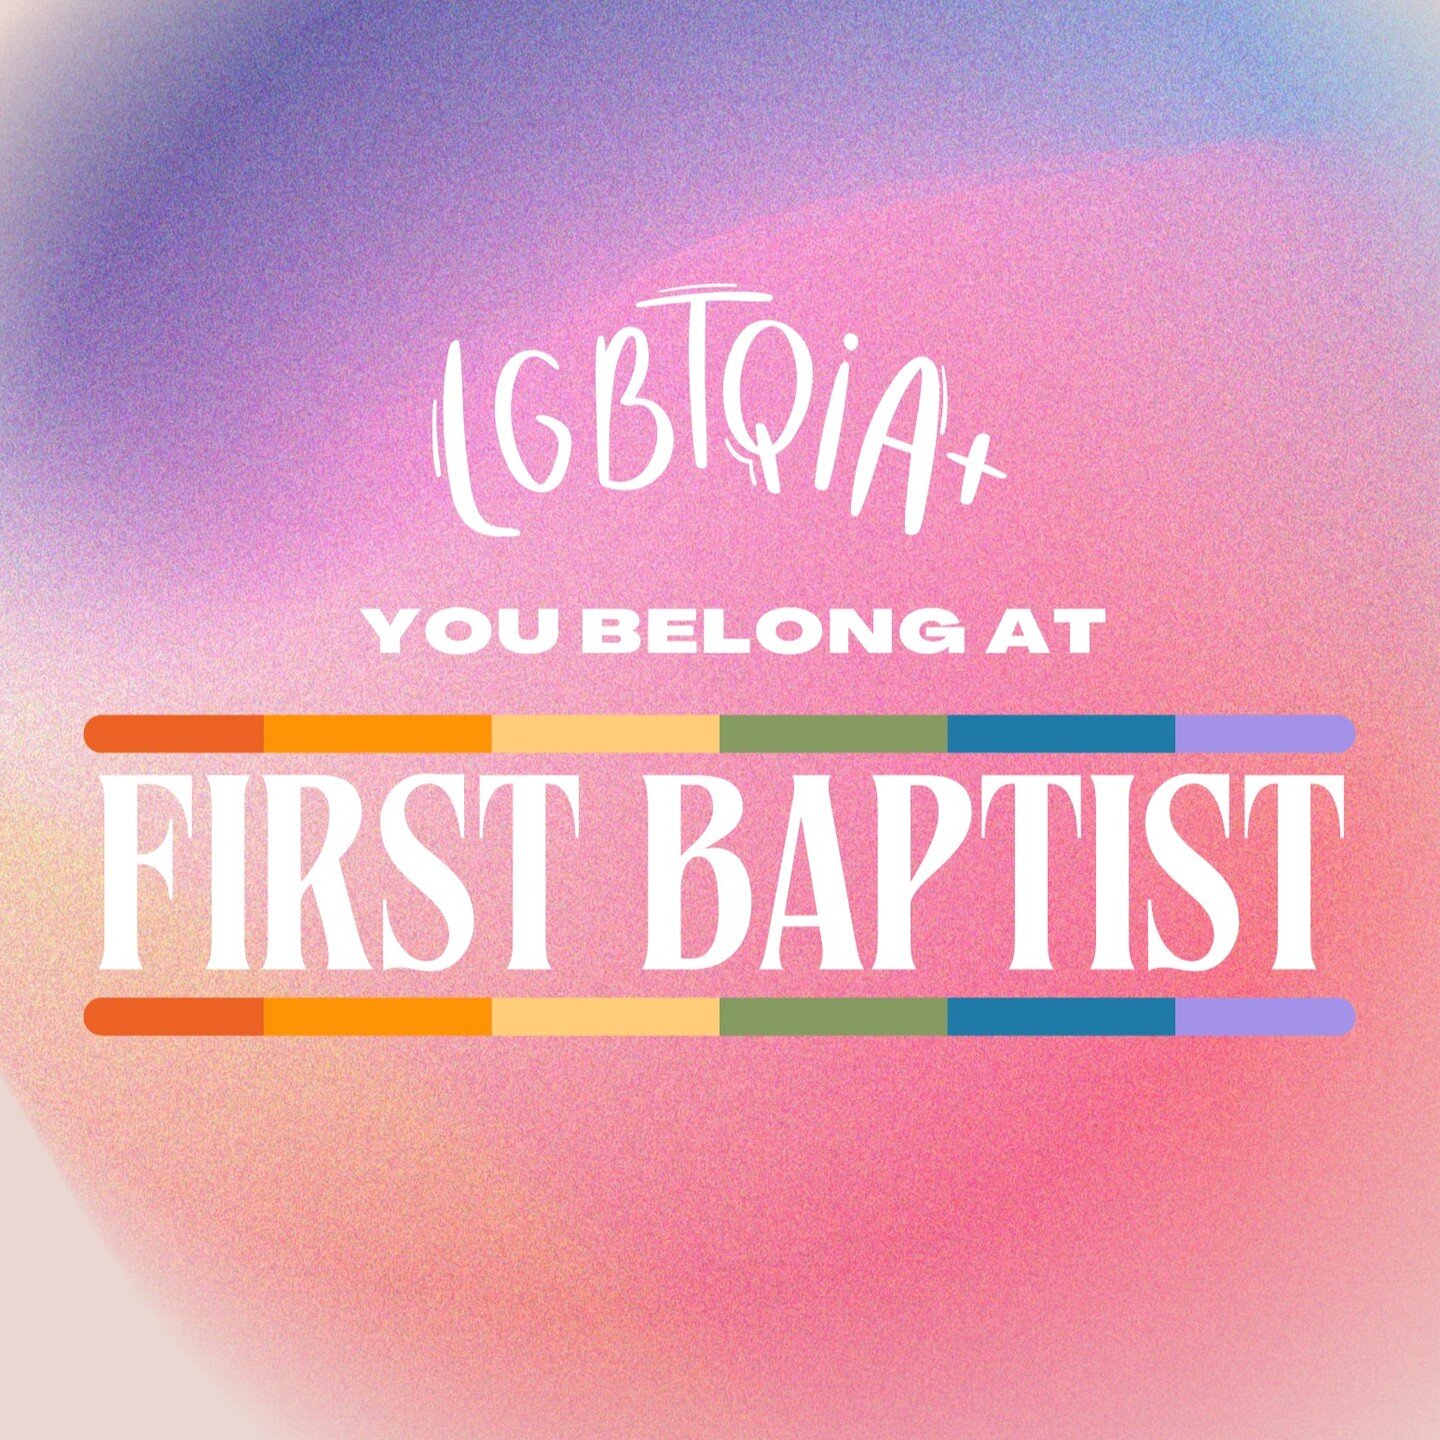 We are unapologetically affirming of our LGBTQIA+ siblings. God loves you and so do we.

Come be a part of what First Baptist is doing!